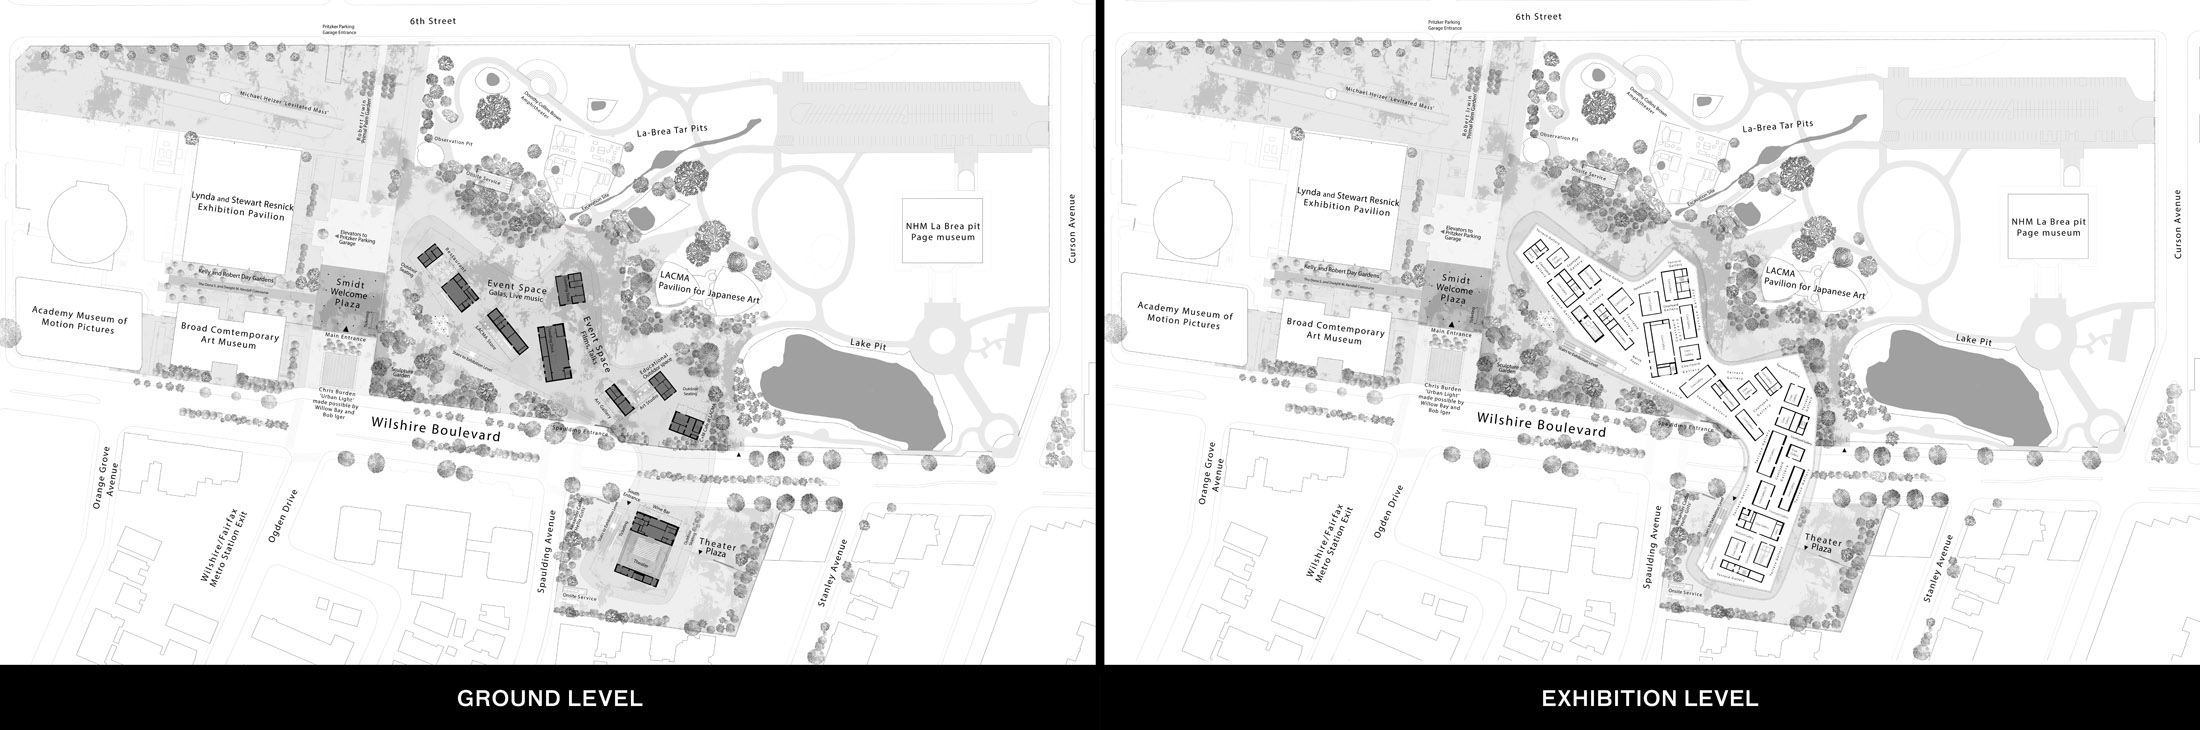 plan of contemporary museum building for the new LACMA